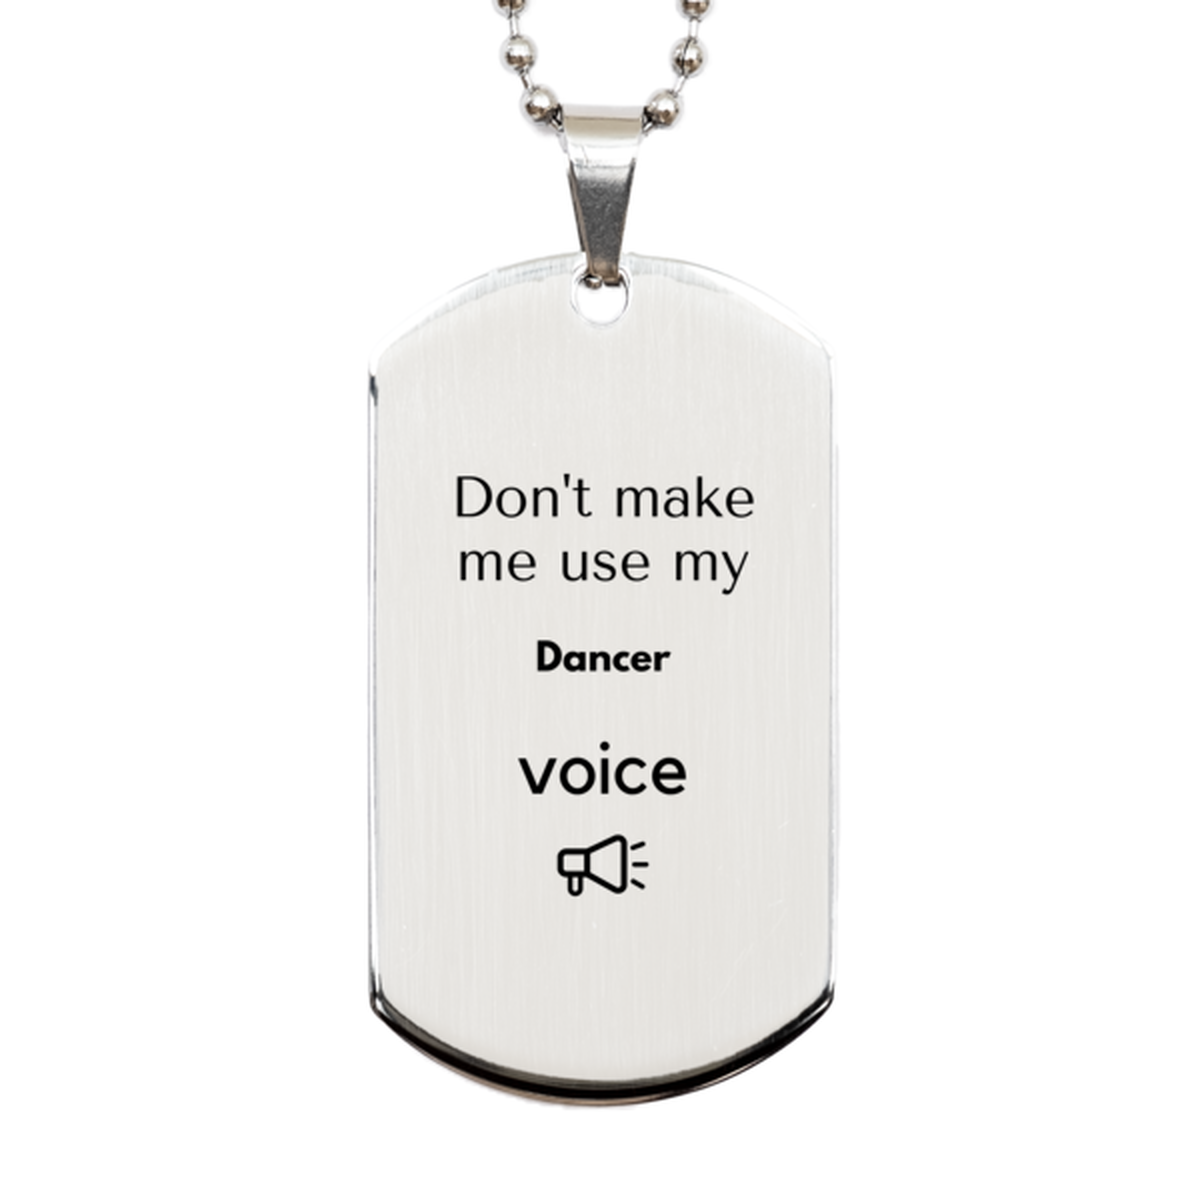 Don't make me use my Dancer voice, Sarcasm Dancer Gifts, Christmas Dancer Silver Dog Tag Birthday Unique Gifts For Dancer Coworkers, Men, Women, Colleague, Friends